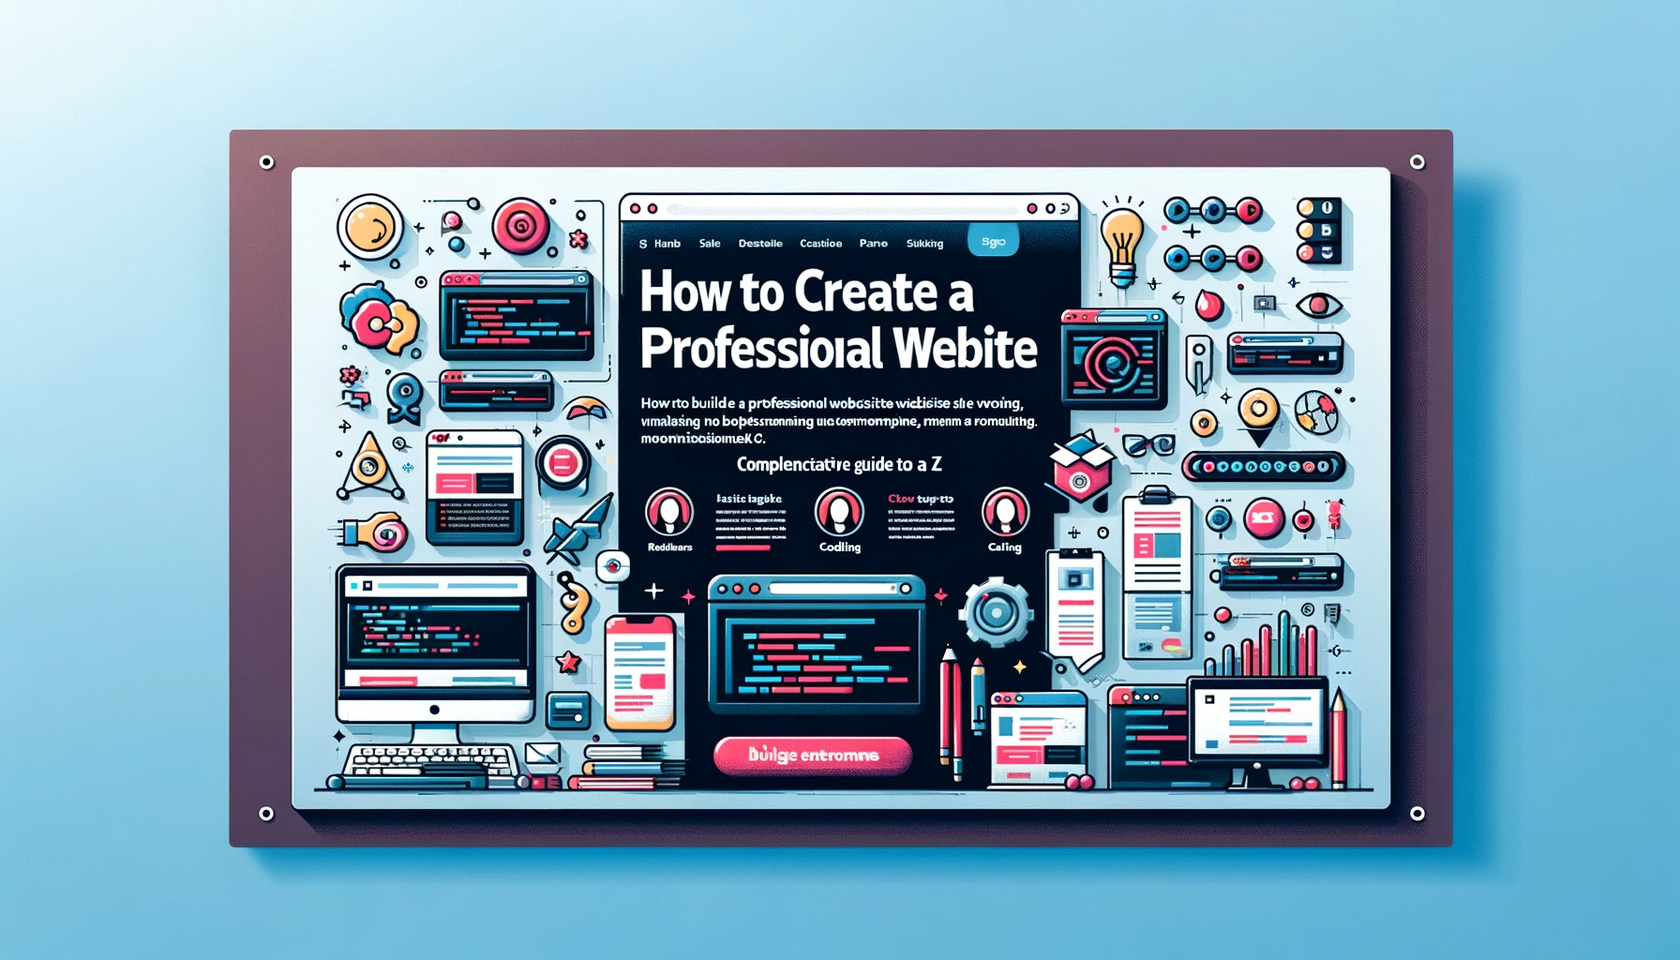 A banner for an article about building professional websites on Tilda. The design should be sleek and modern, incorporating elements of web development and design. Include icons or illustrations representing website creation, coding, and SEO optimization. The banner should be visually appealing and convey a sense of creativity and professionalism in web design. The text 'How to Create a Professional Website on Tilda: A Comprehensive Guide from A to Z' should be prominently displayed. The color scheme should be harmonious and aligned with a tech-oriented, professional look.